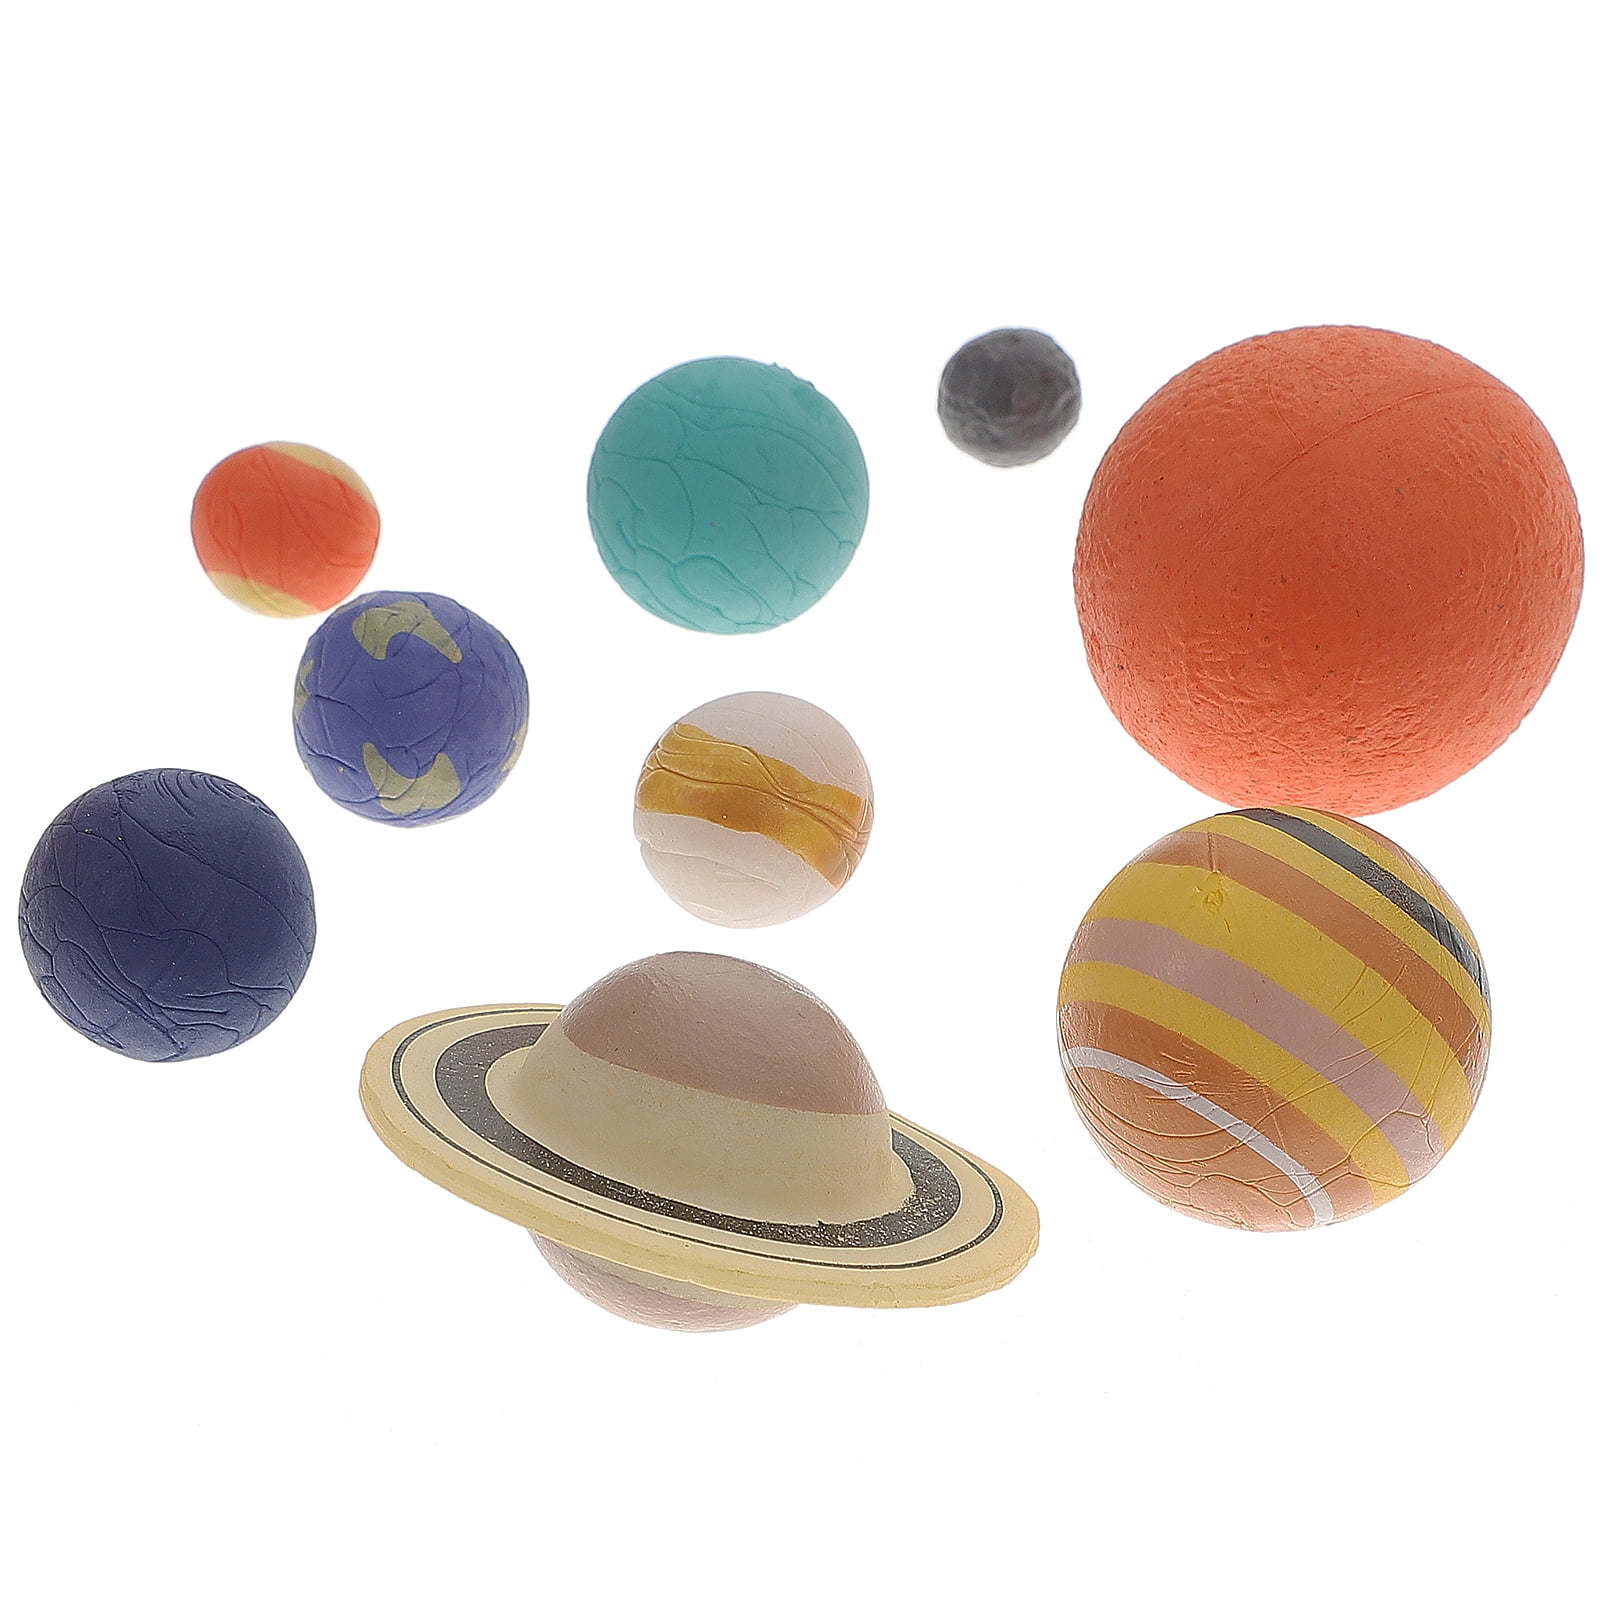 Solar System Model Kit for Kids With Planetarium Projector 